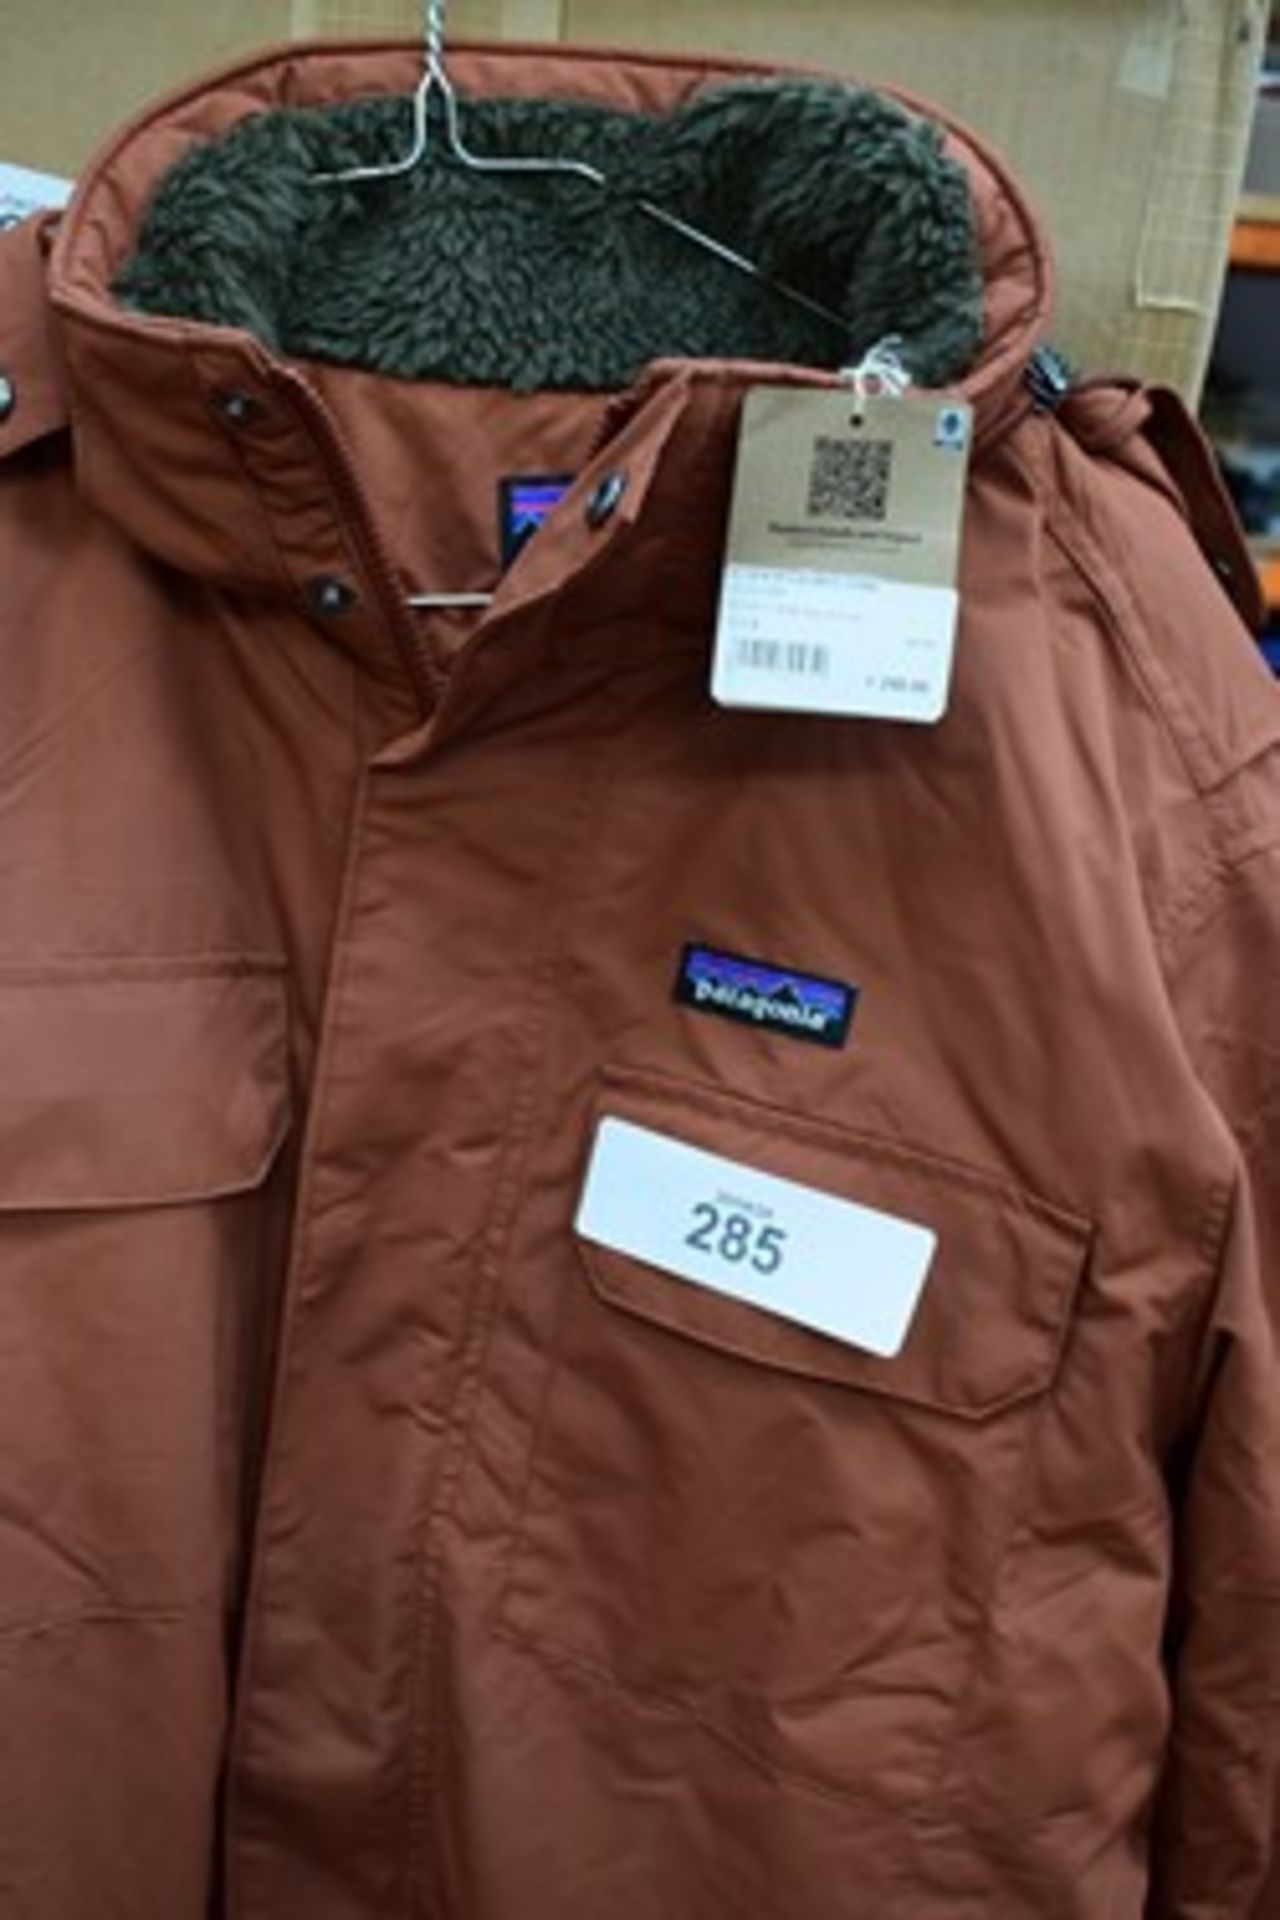 1 x Patagonia Isthmus SBU brown parka coat, size L, RRP: Â£240 - new with labels (CR1)